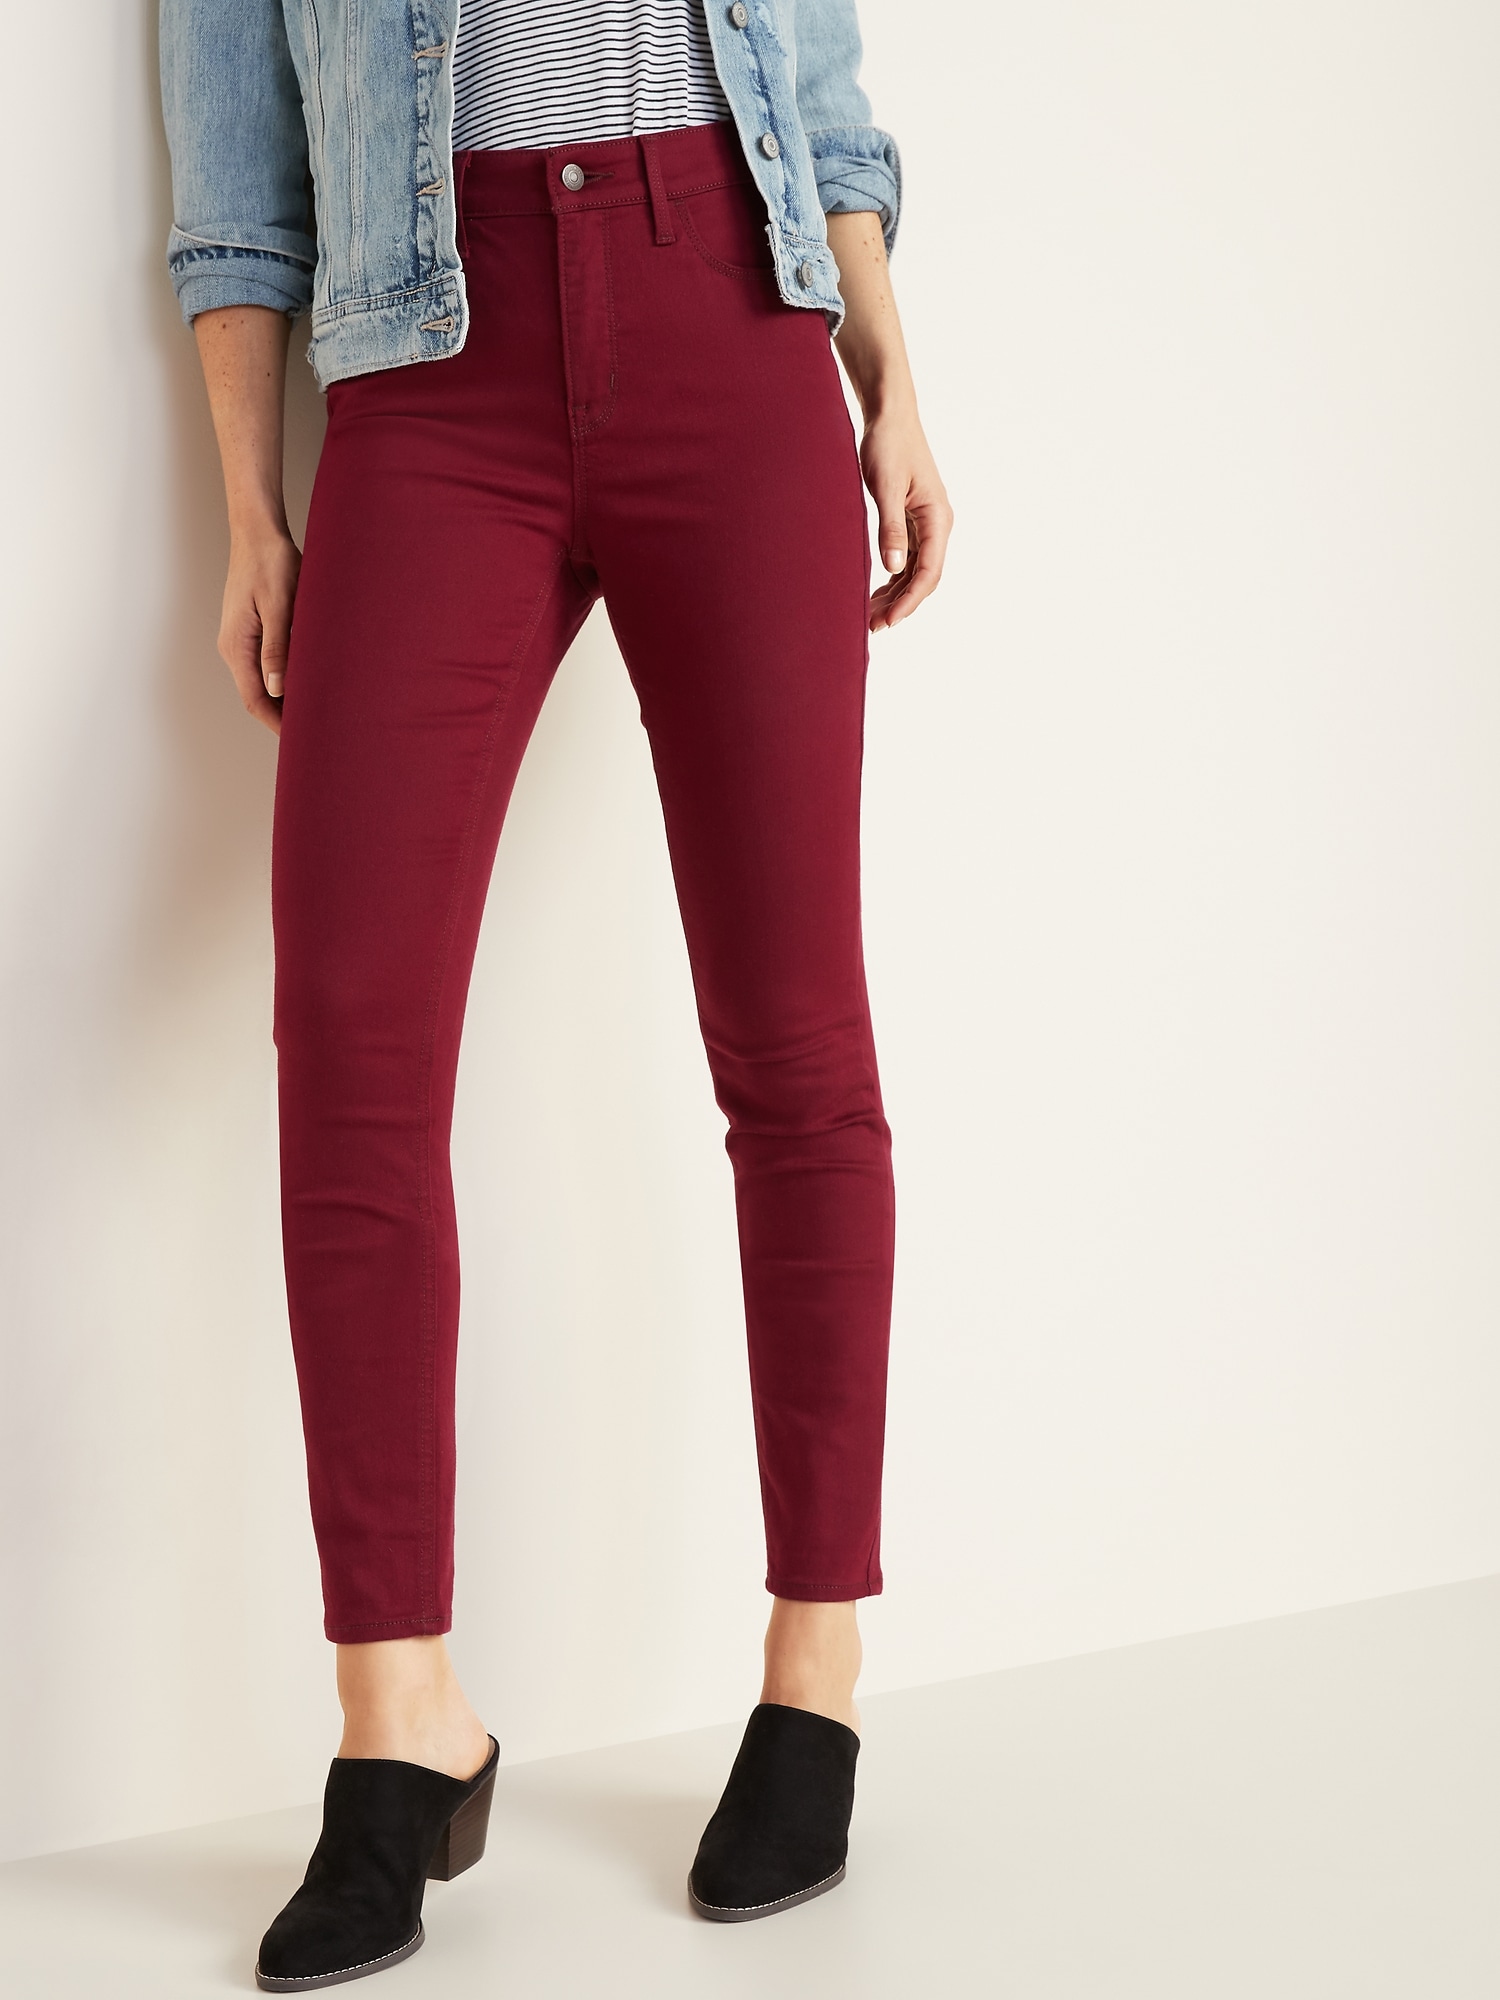 Old Navy Red Skinny Jeans